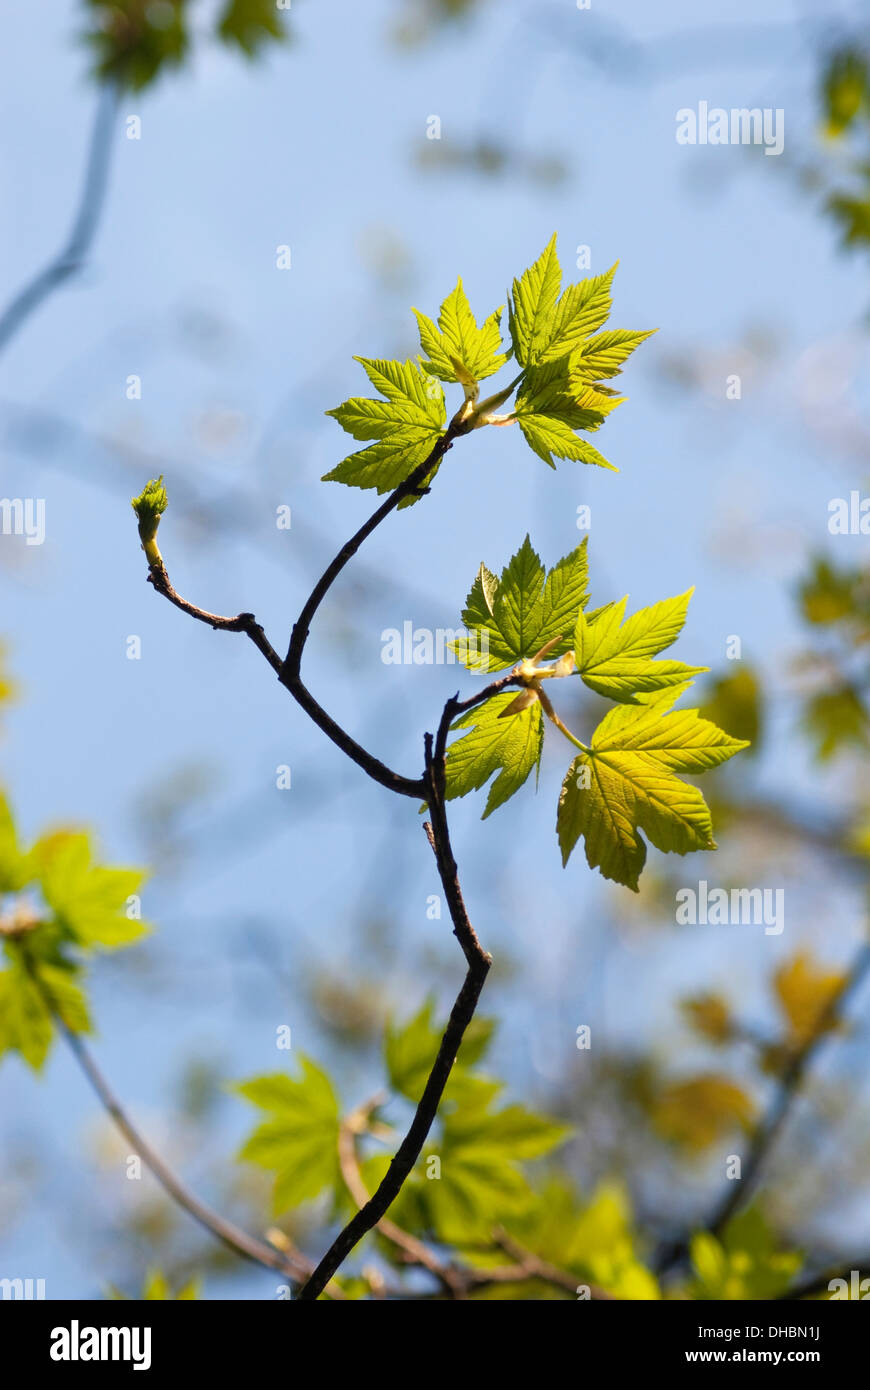 Sycamore, Acer pseudoplatanus, Close up of leaves on the tree growing outdoor. Stock Photo